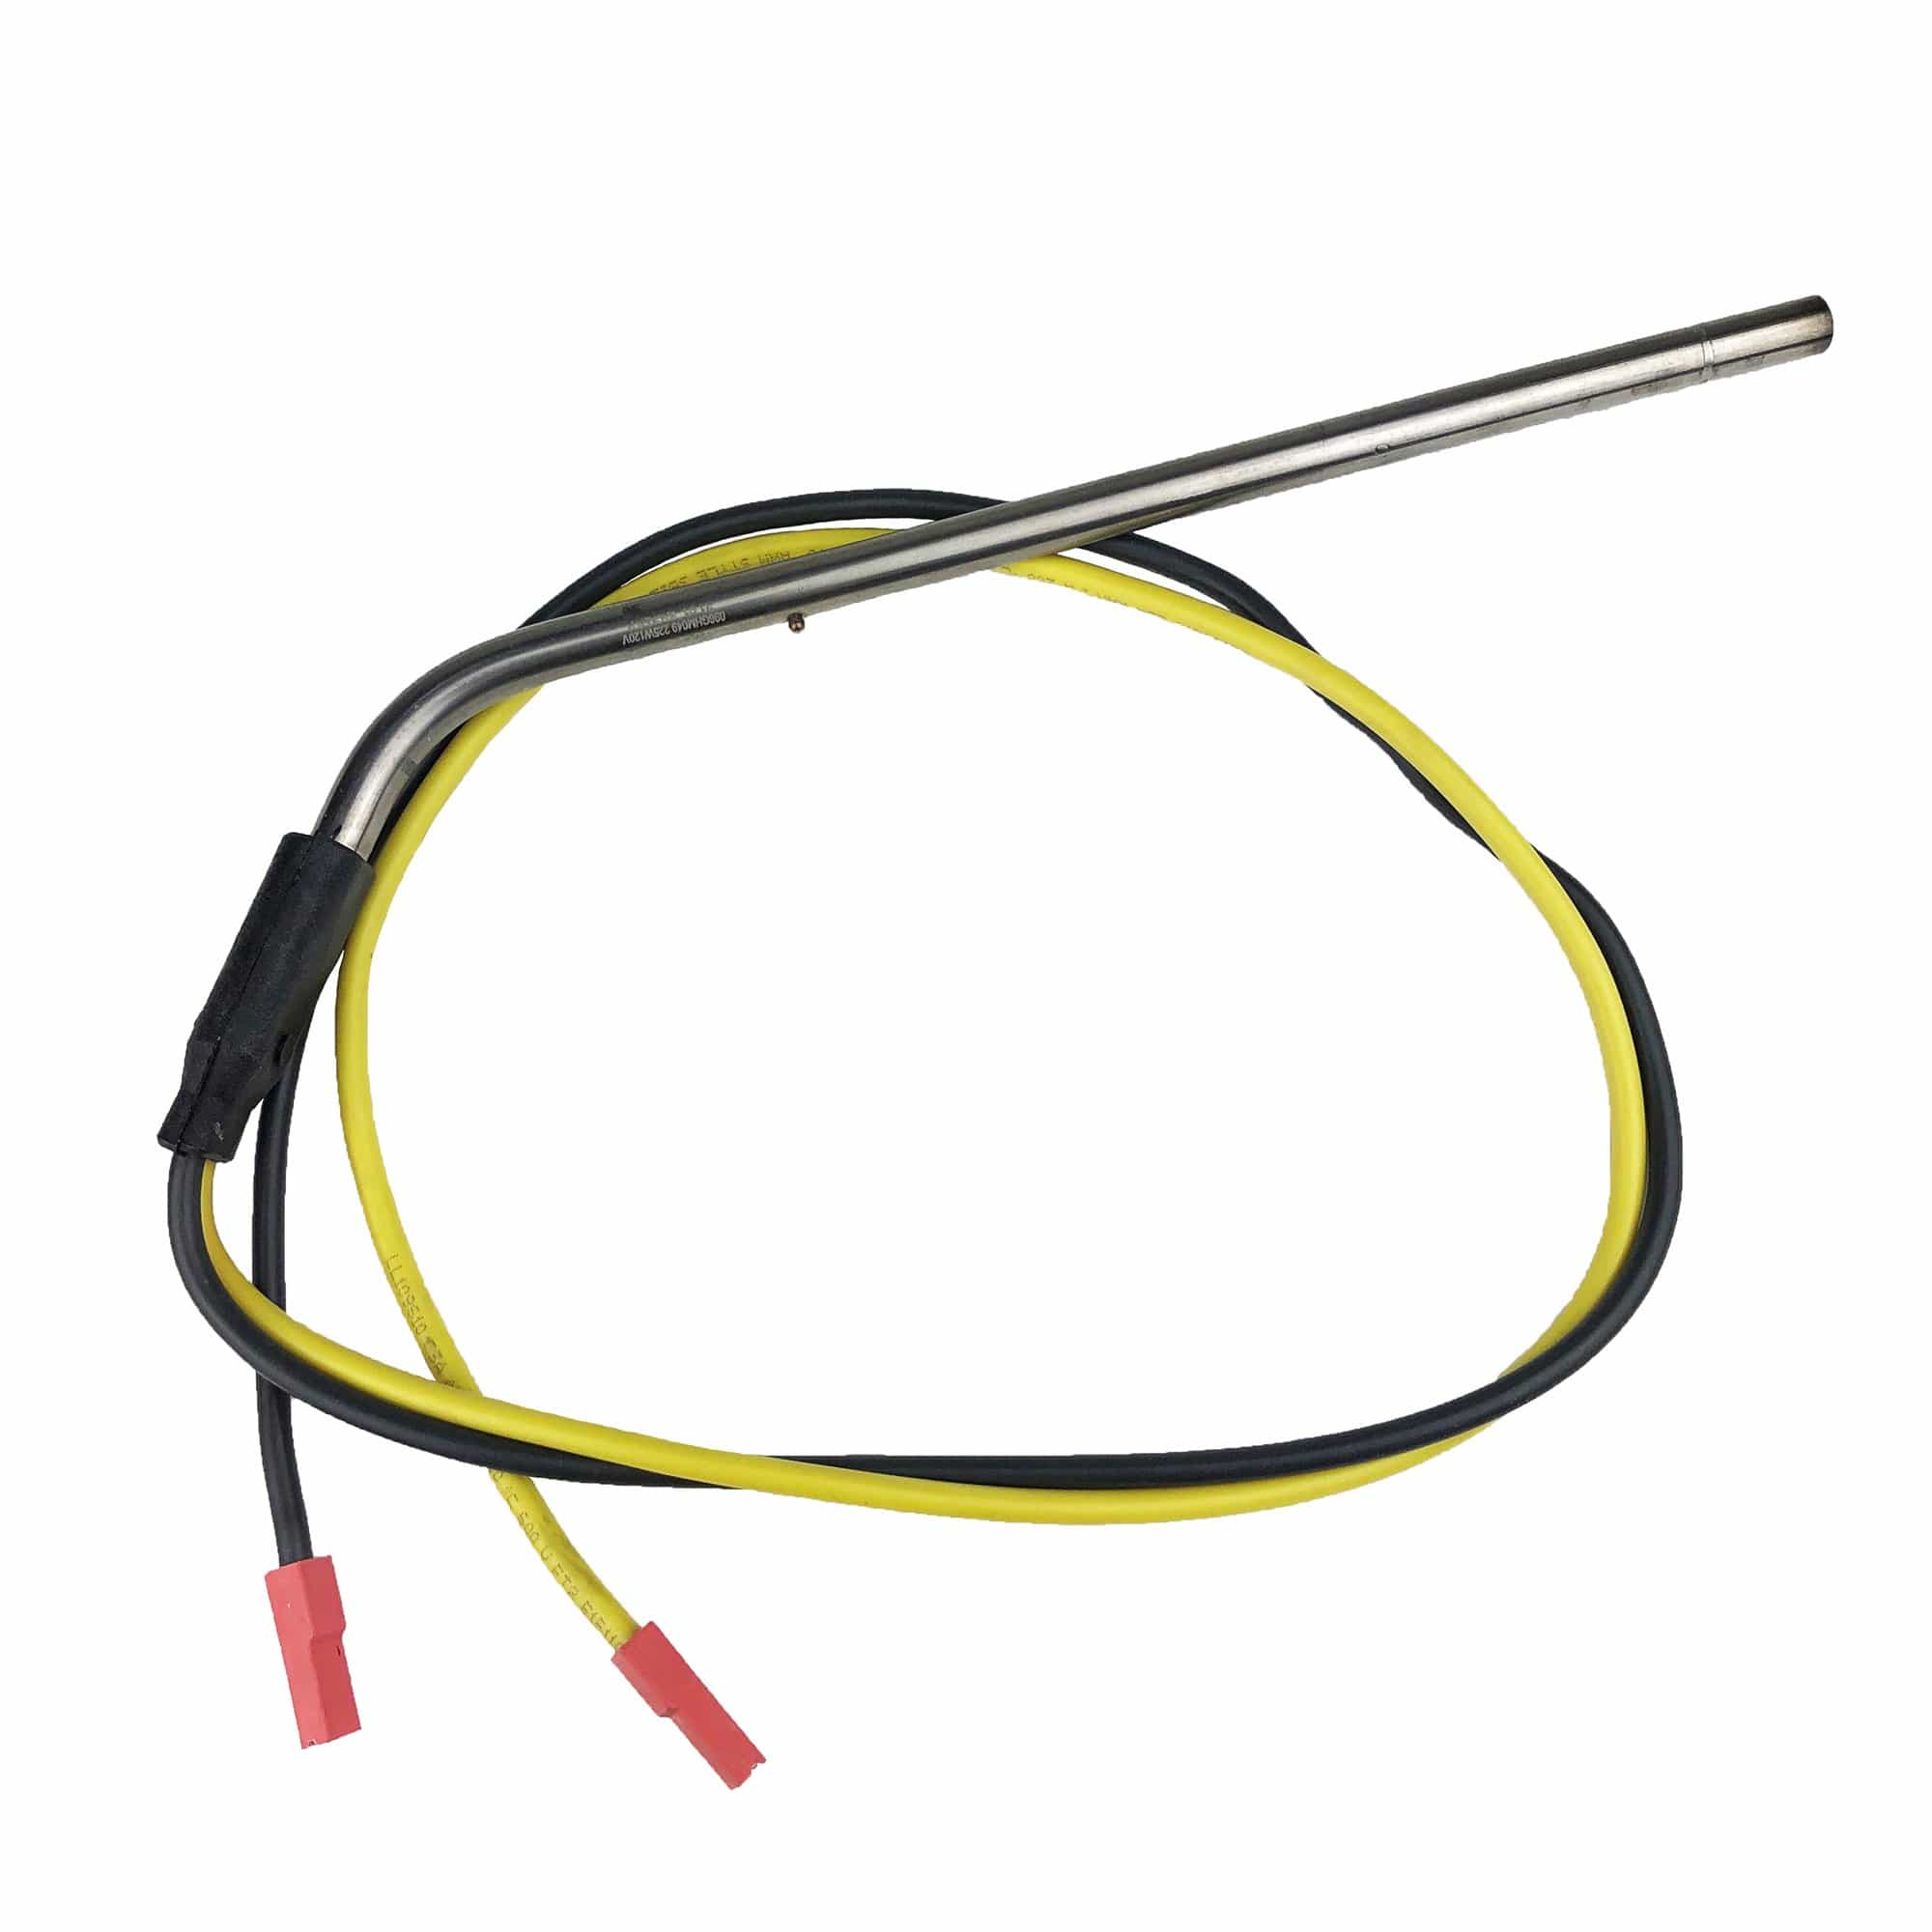 Norcold 630807 Heating Element